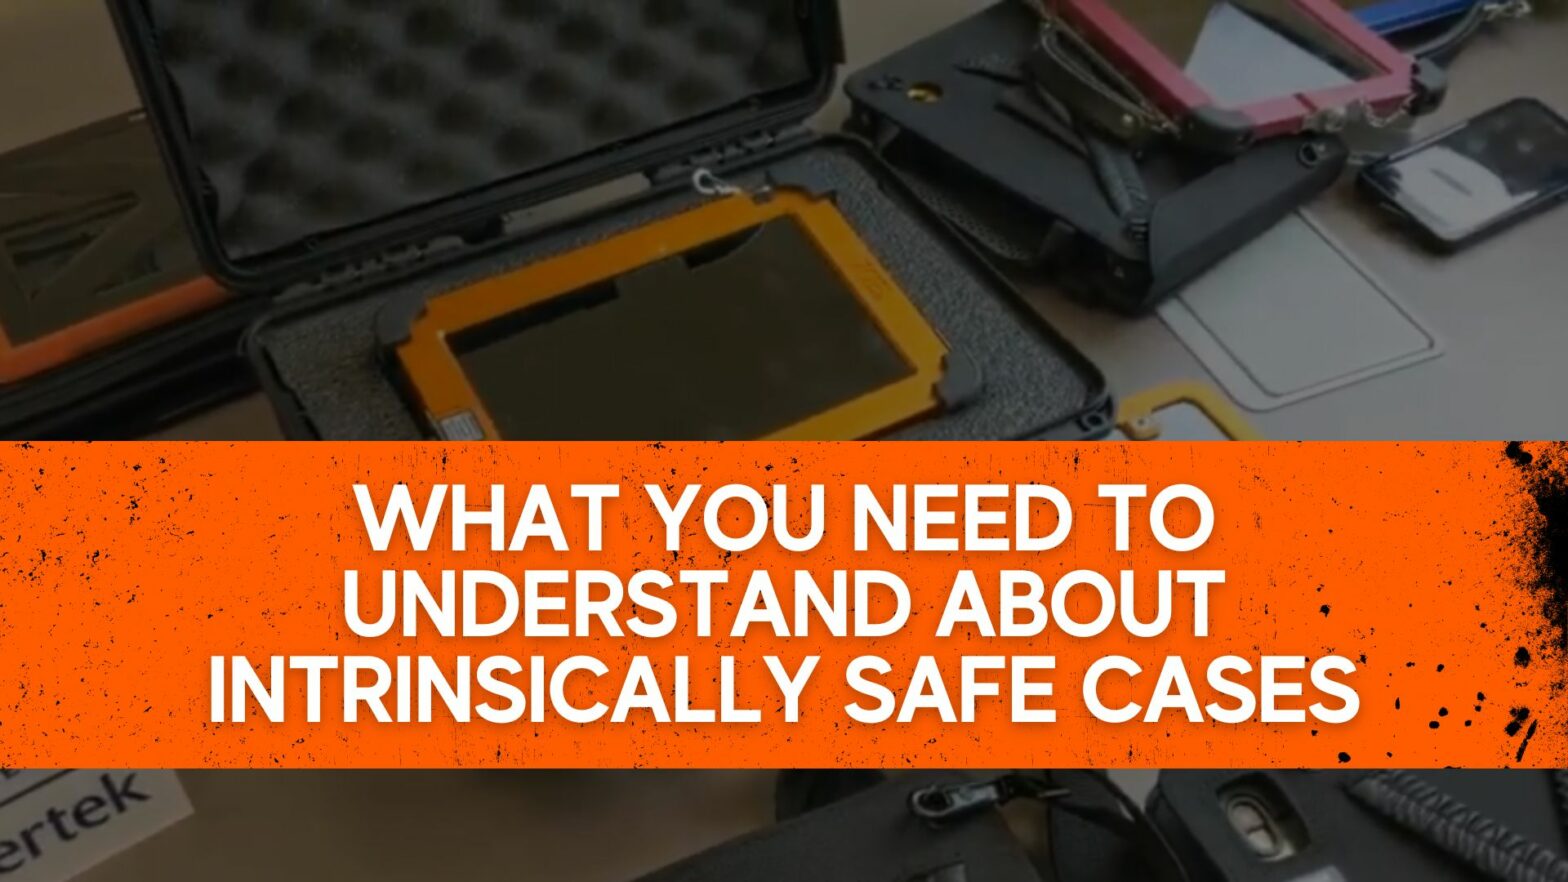 What You Need to Understand About Intrinsically Safe Cases